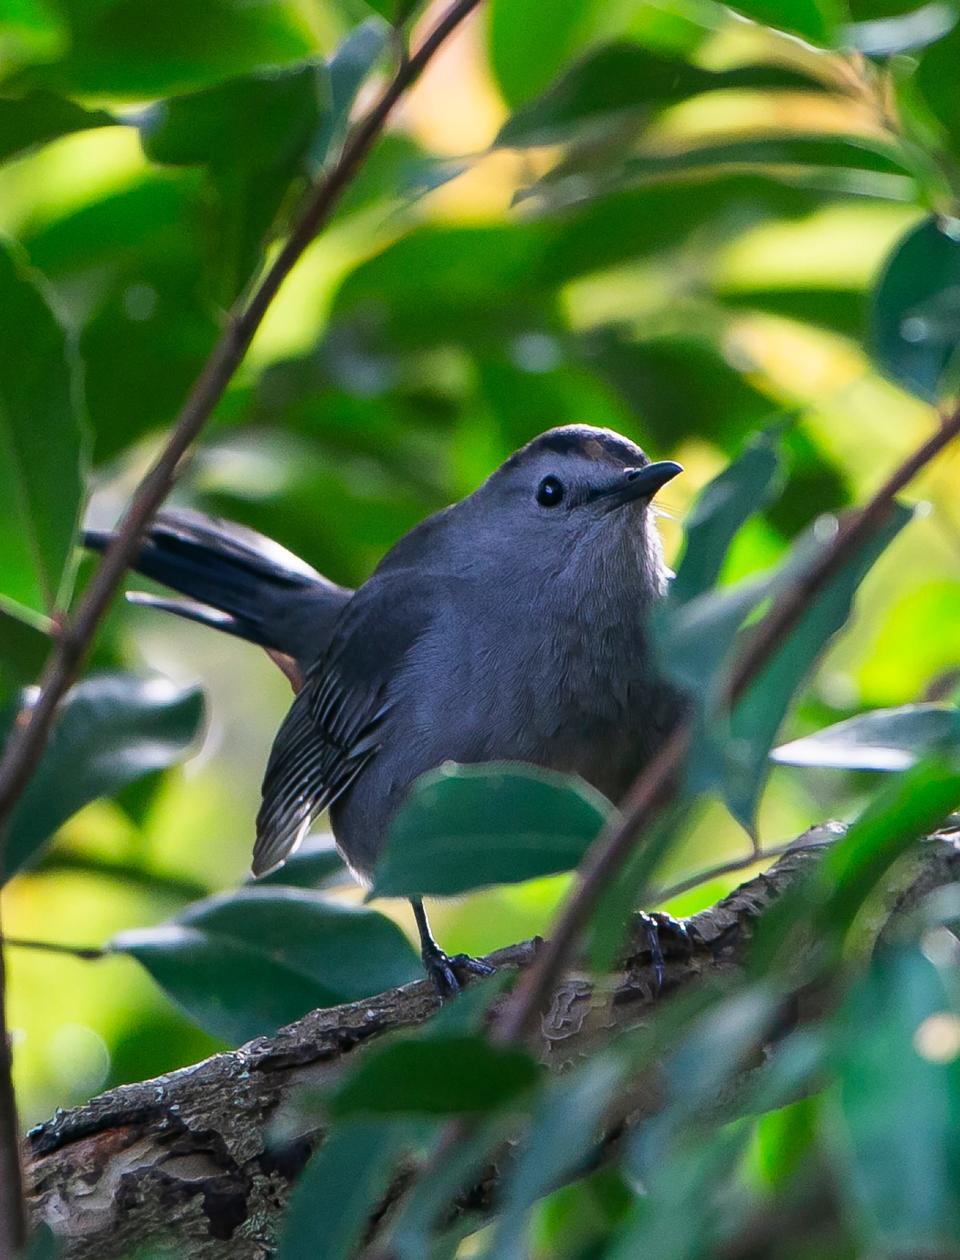 The gray catbird, a relative of the mockingbird, is known to mimic the calls of other birds. The species is a common sight in North Carolina, especially along the coastal plain.